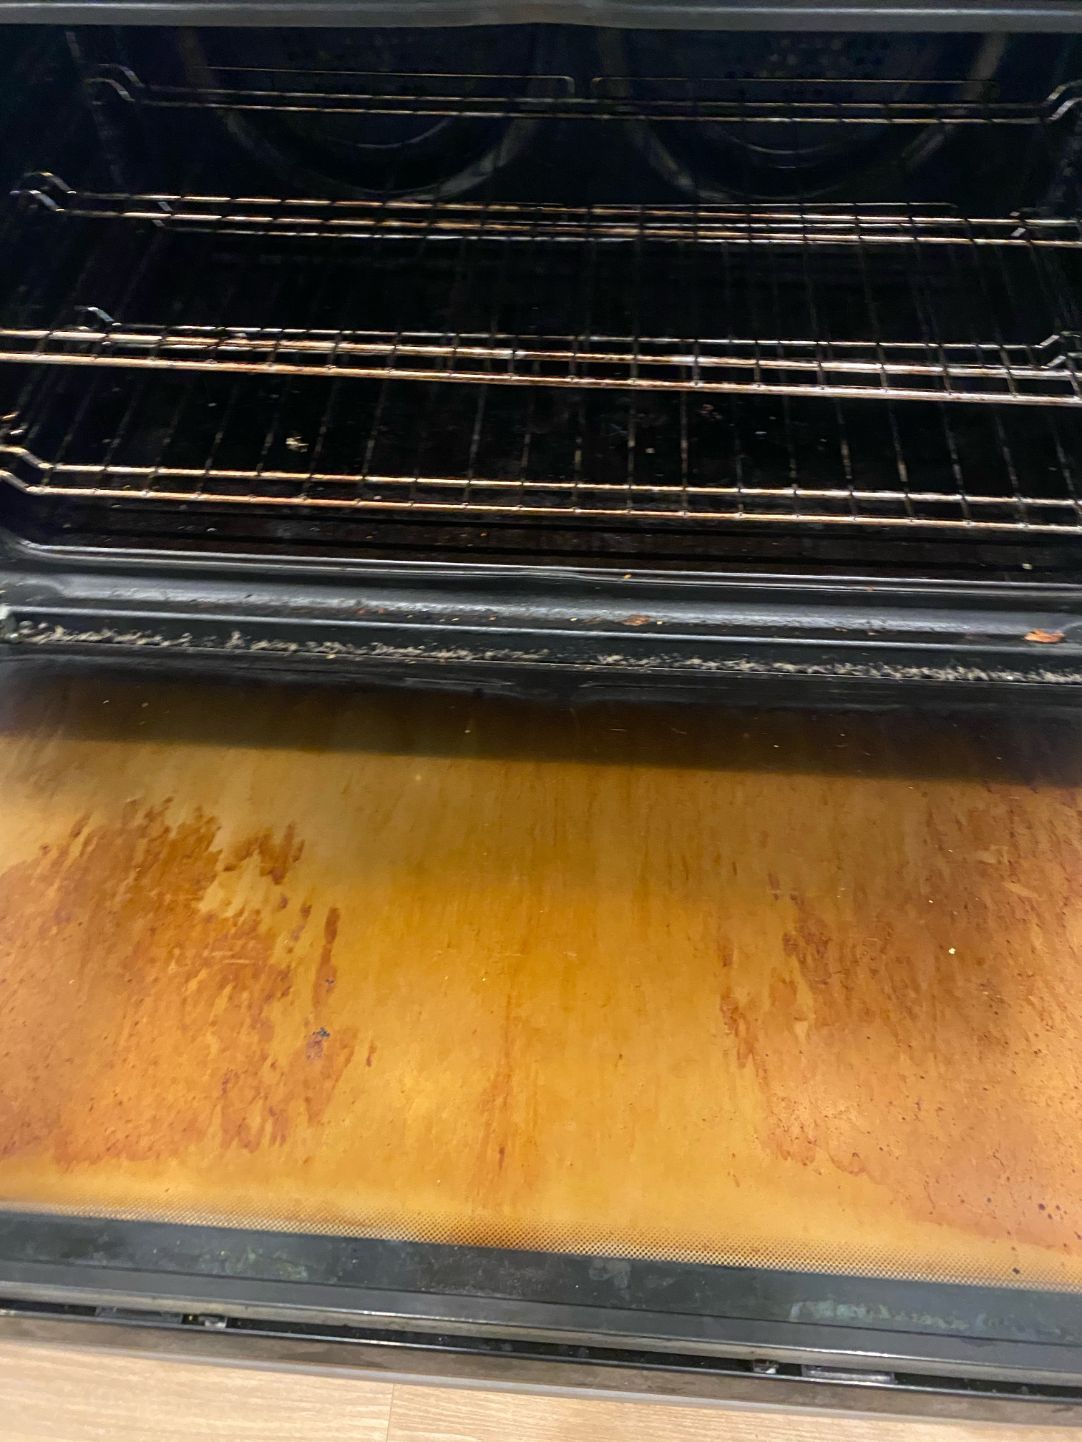 Oven Before Clean